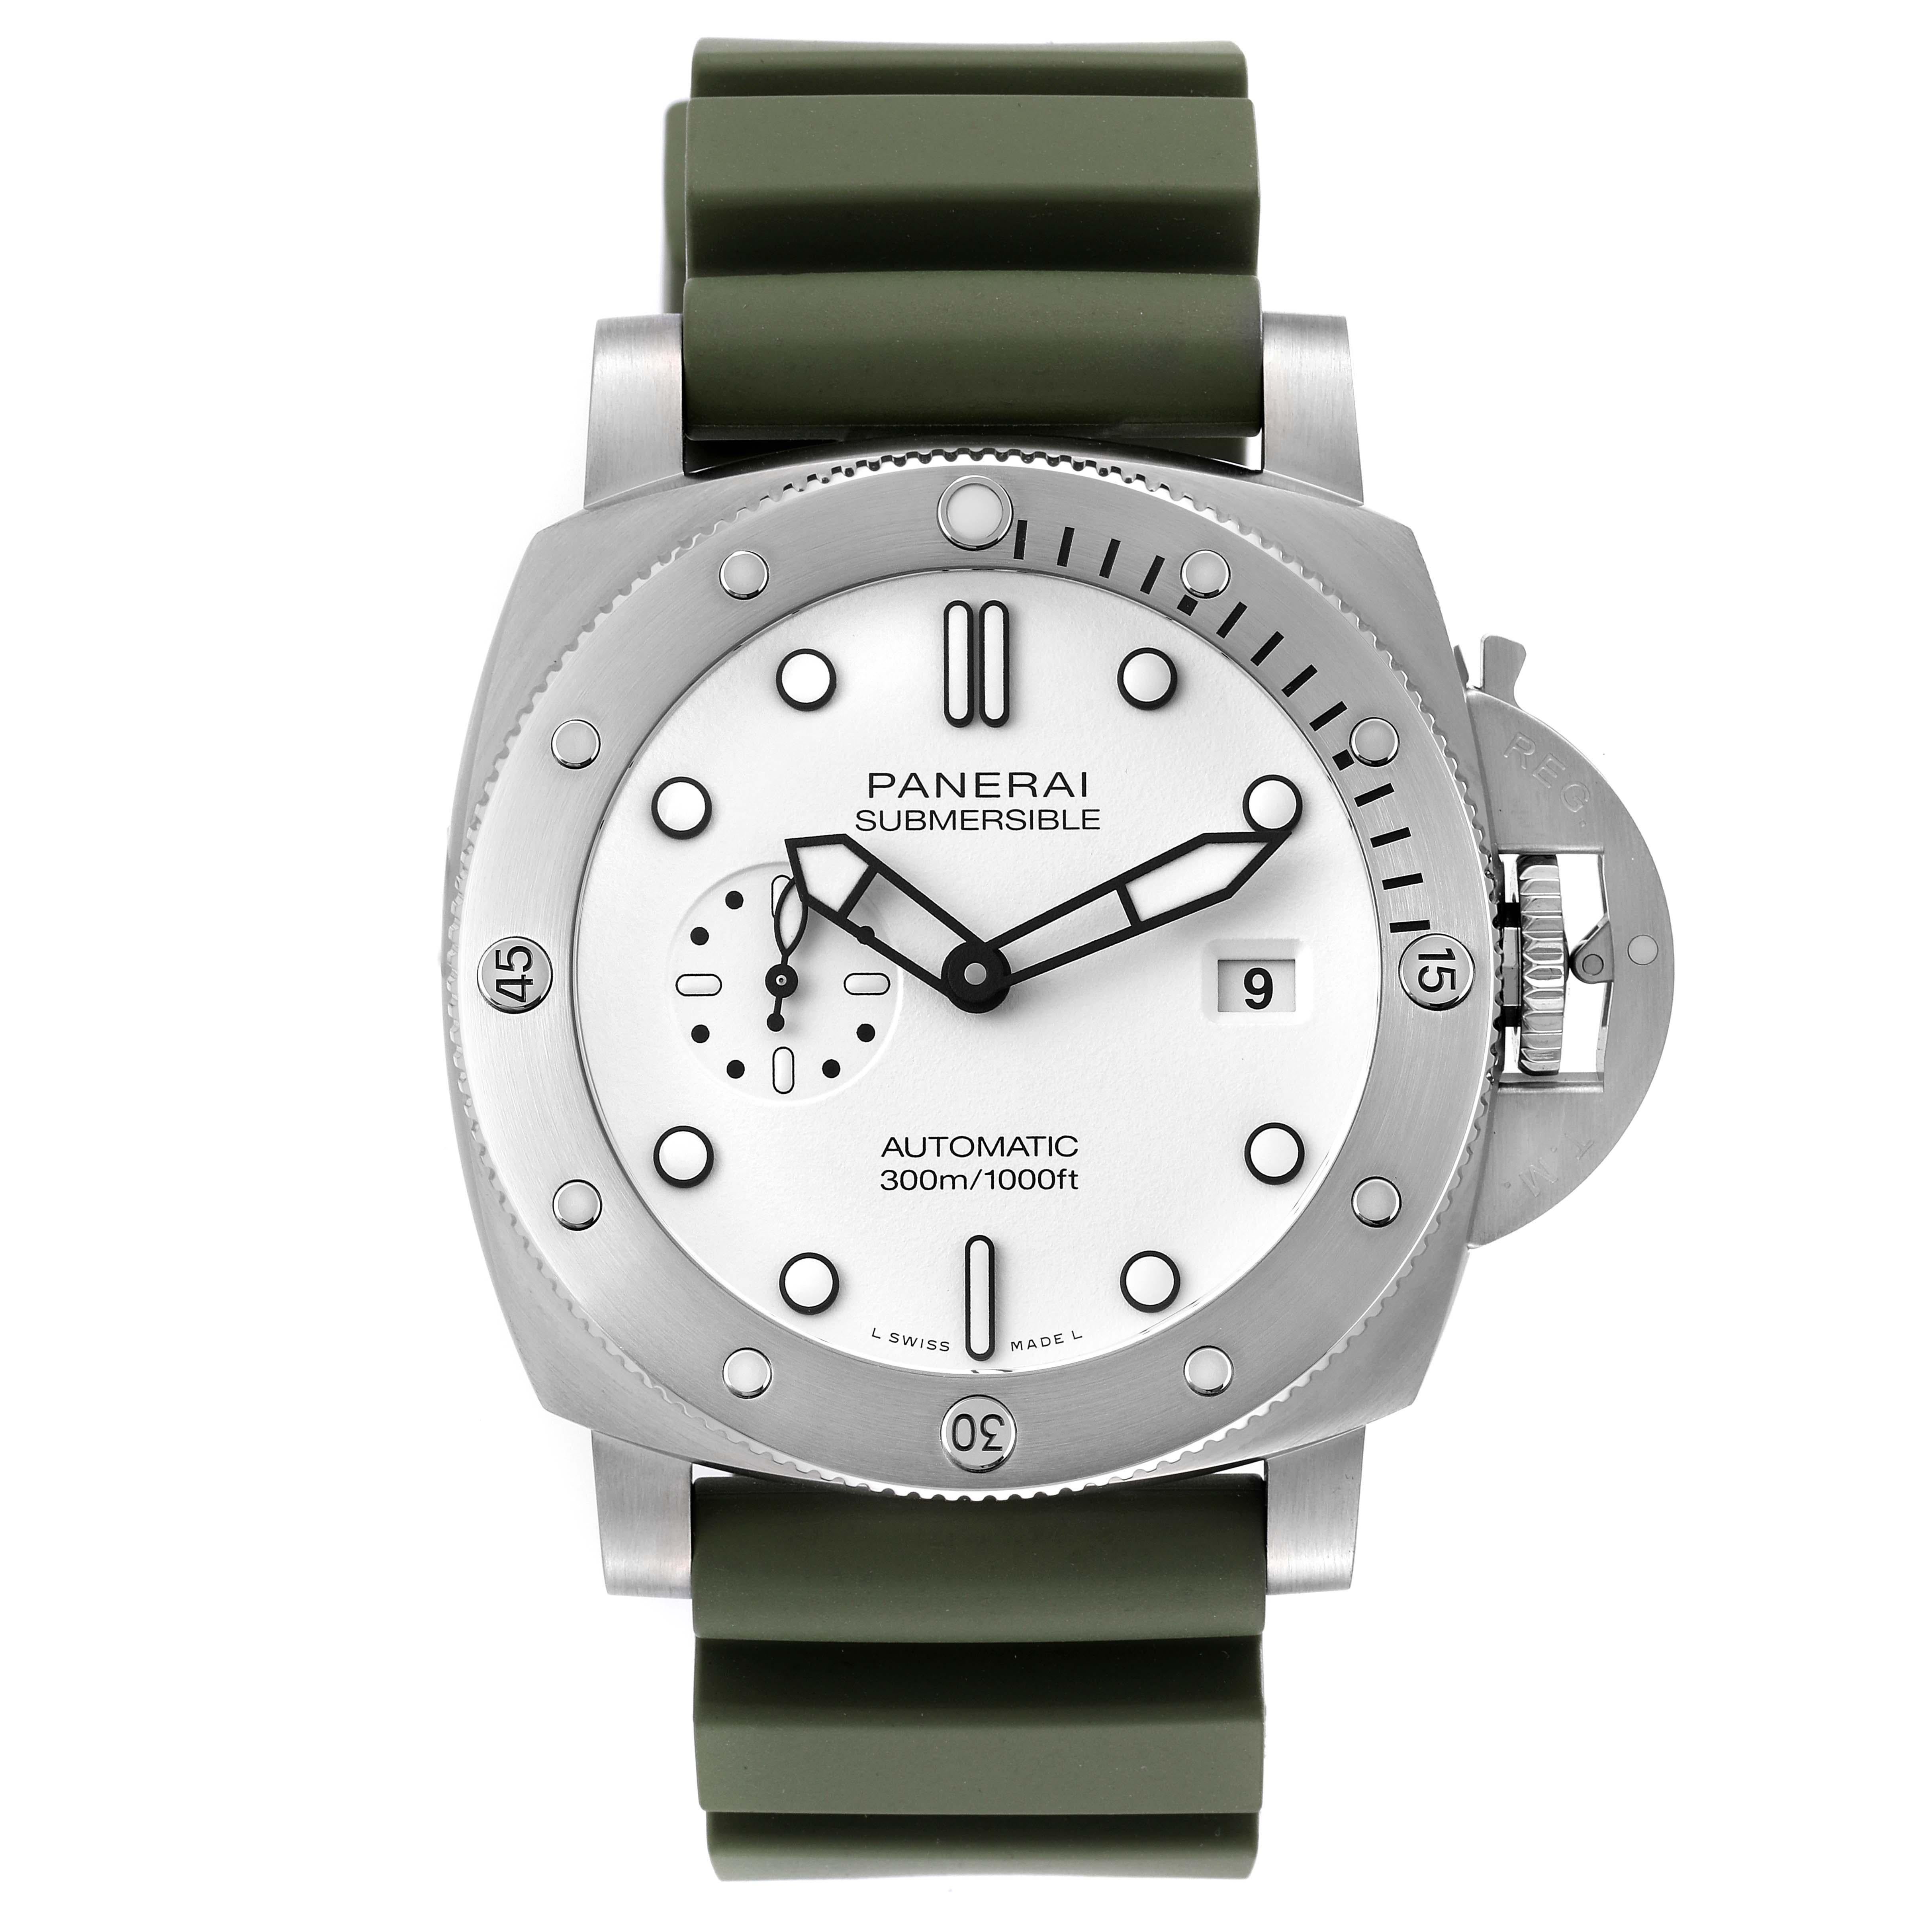 Panerai Submersible QuarantaQuattro Bianco Steel Mens Watch PAM01226 Unworn. Automatic self-winding movement. Stainless steel cushion case, 44.0 mm in diameter. Panerai patented crown protector. Unidirectional rotating diver's bezel. Scratch